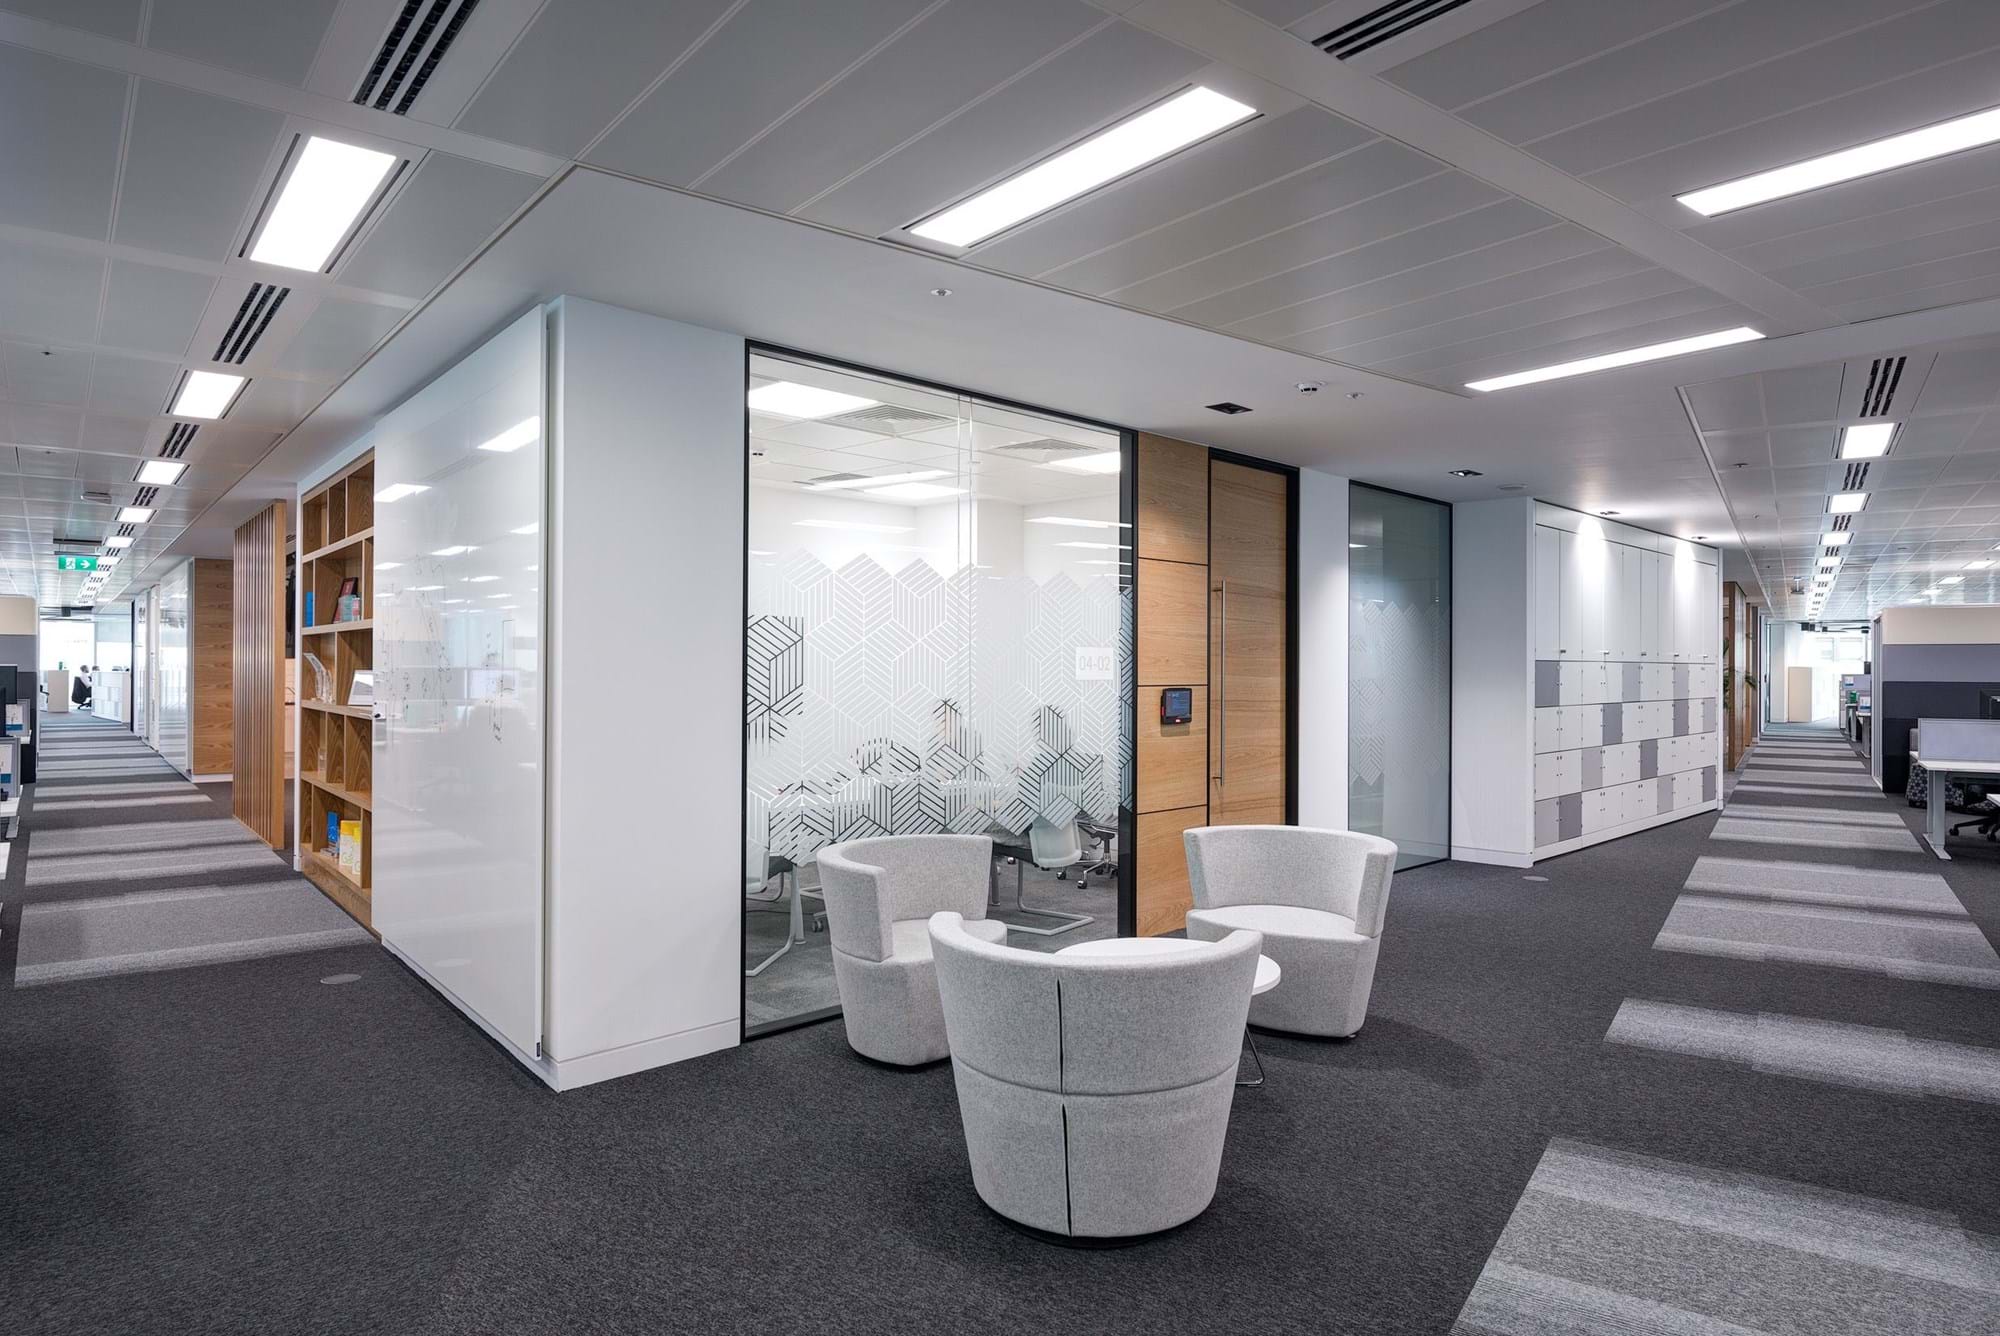 Modus Workspace office design, fit out and refurbishment - Atkins - Victoria, London - Atkins 09 highres sRGB.jpg